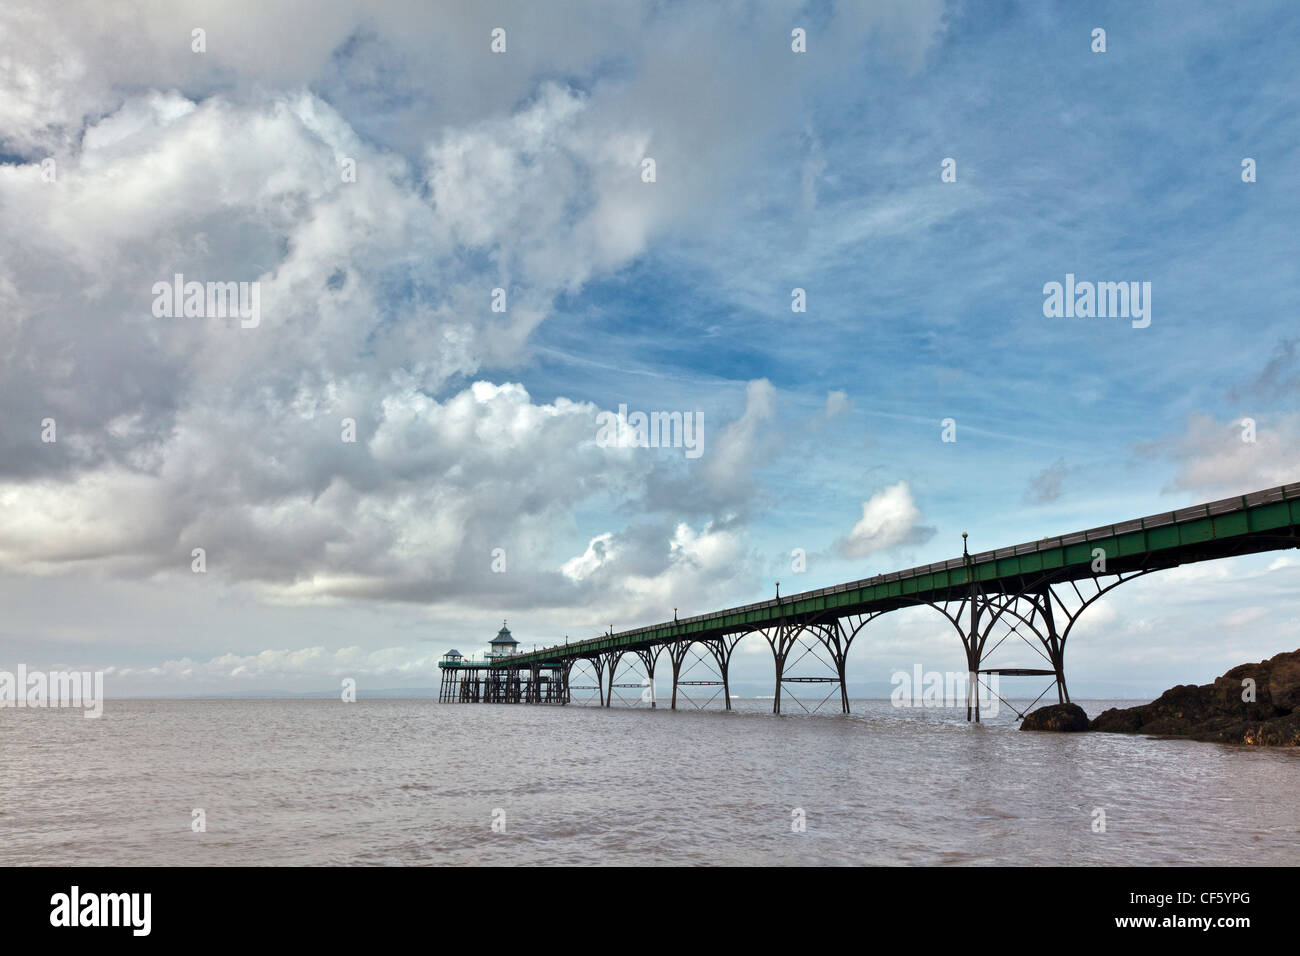 Clevedon Pier, the only fully intact, Grade 1 listed pier in the country, stretching out into the River Severn estuary. Stock Photo